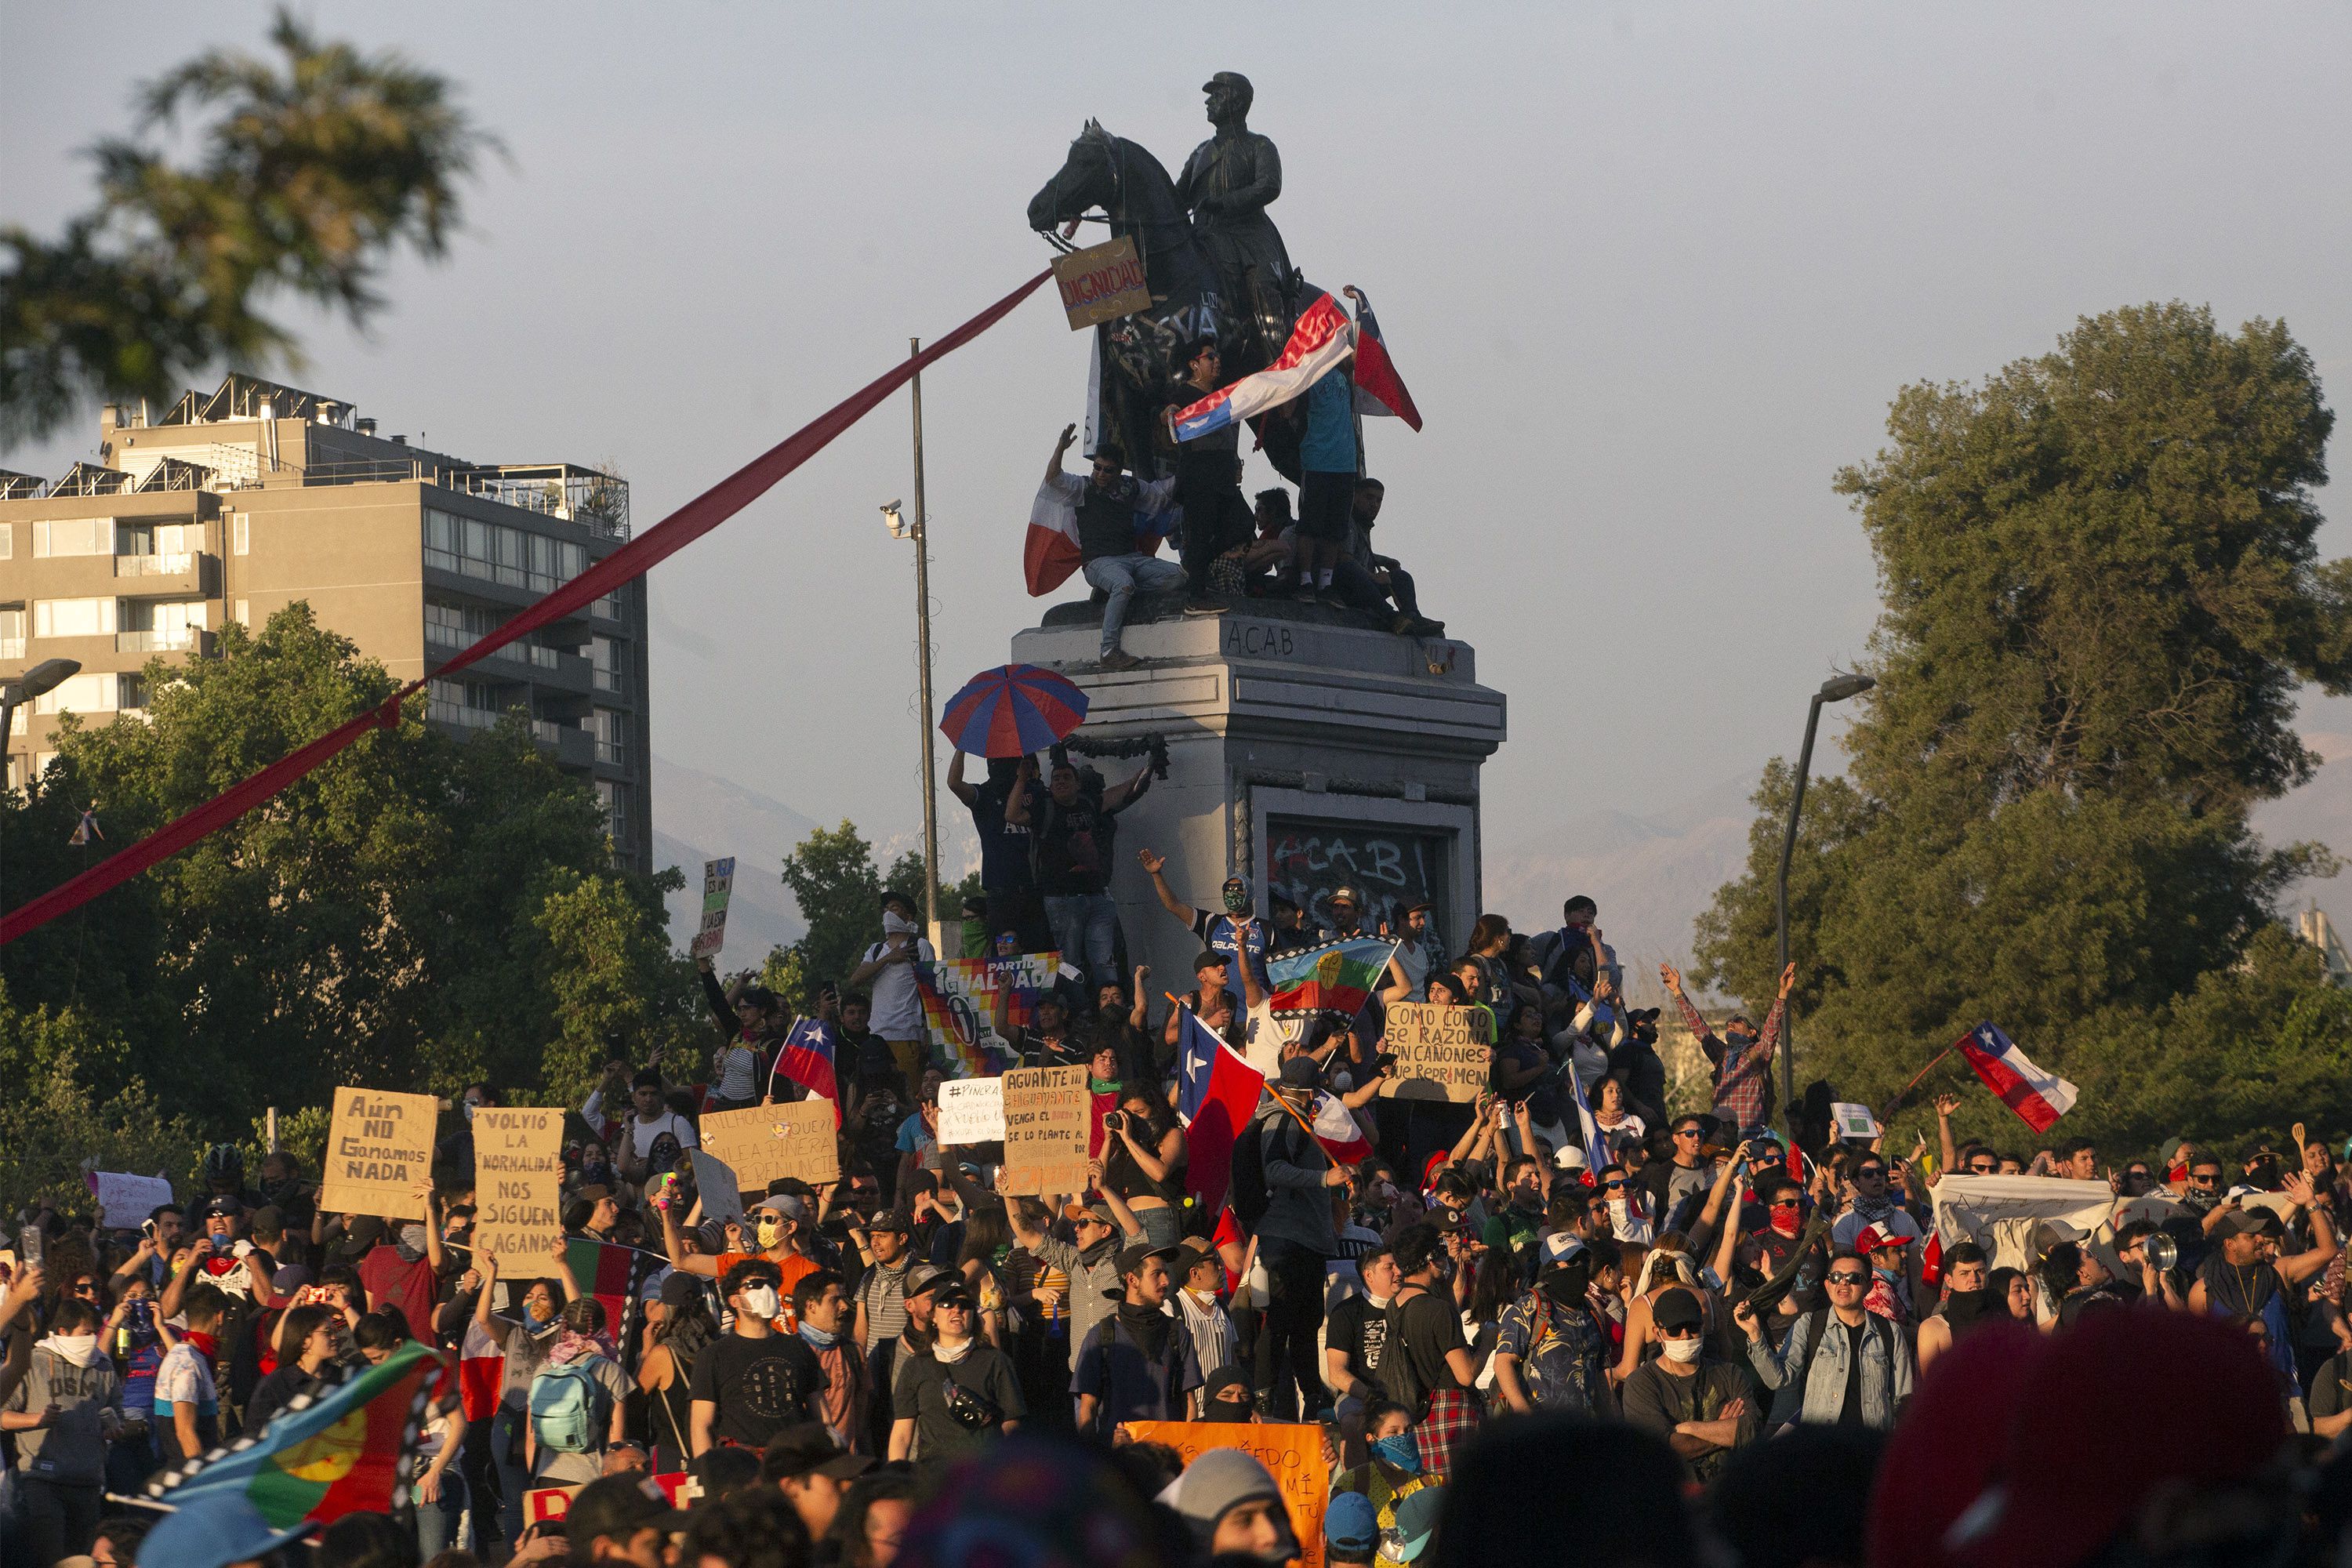 People demonstrate against the government economic policies in Santiago, on October 26, 2019, a day after more than one million people took to the streets for the largest protests in a week of demonstrations. - Chilean President Sebastian Pinera on Saturday announced a major government reshuffle and the military lifted the nighttime curfew in the Chilean capital Santiago, after a week of deadly demonstrations demanding economic reforms and Pinera's resignation. (Photo by CLAUDIO REYES / AFP)